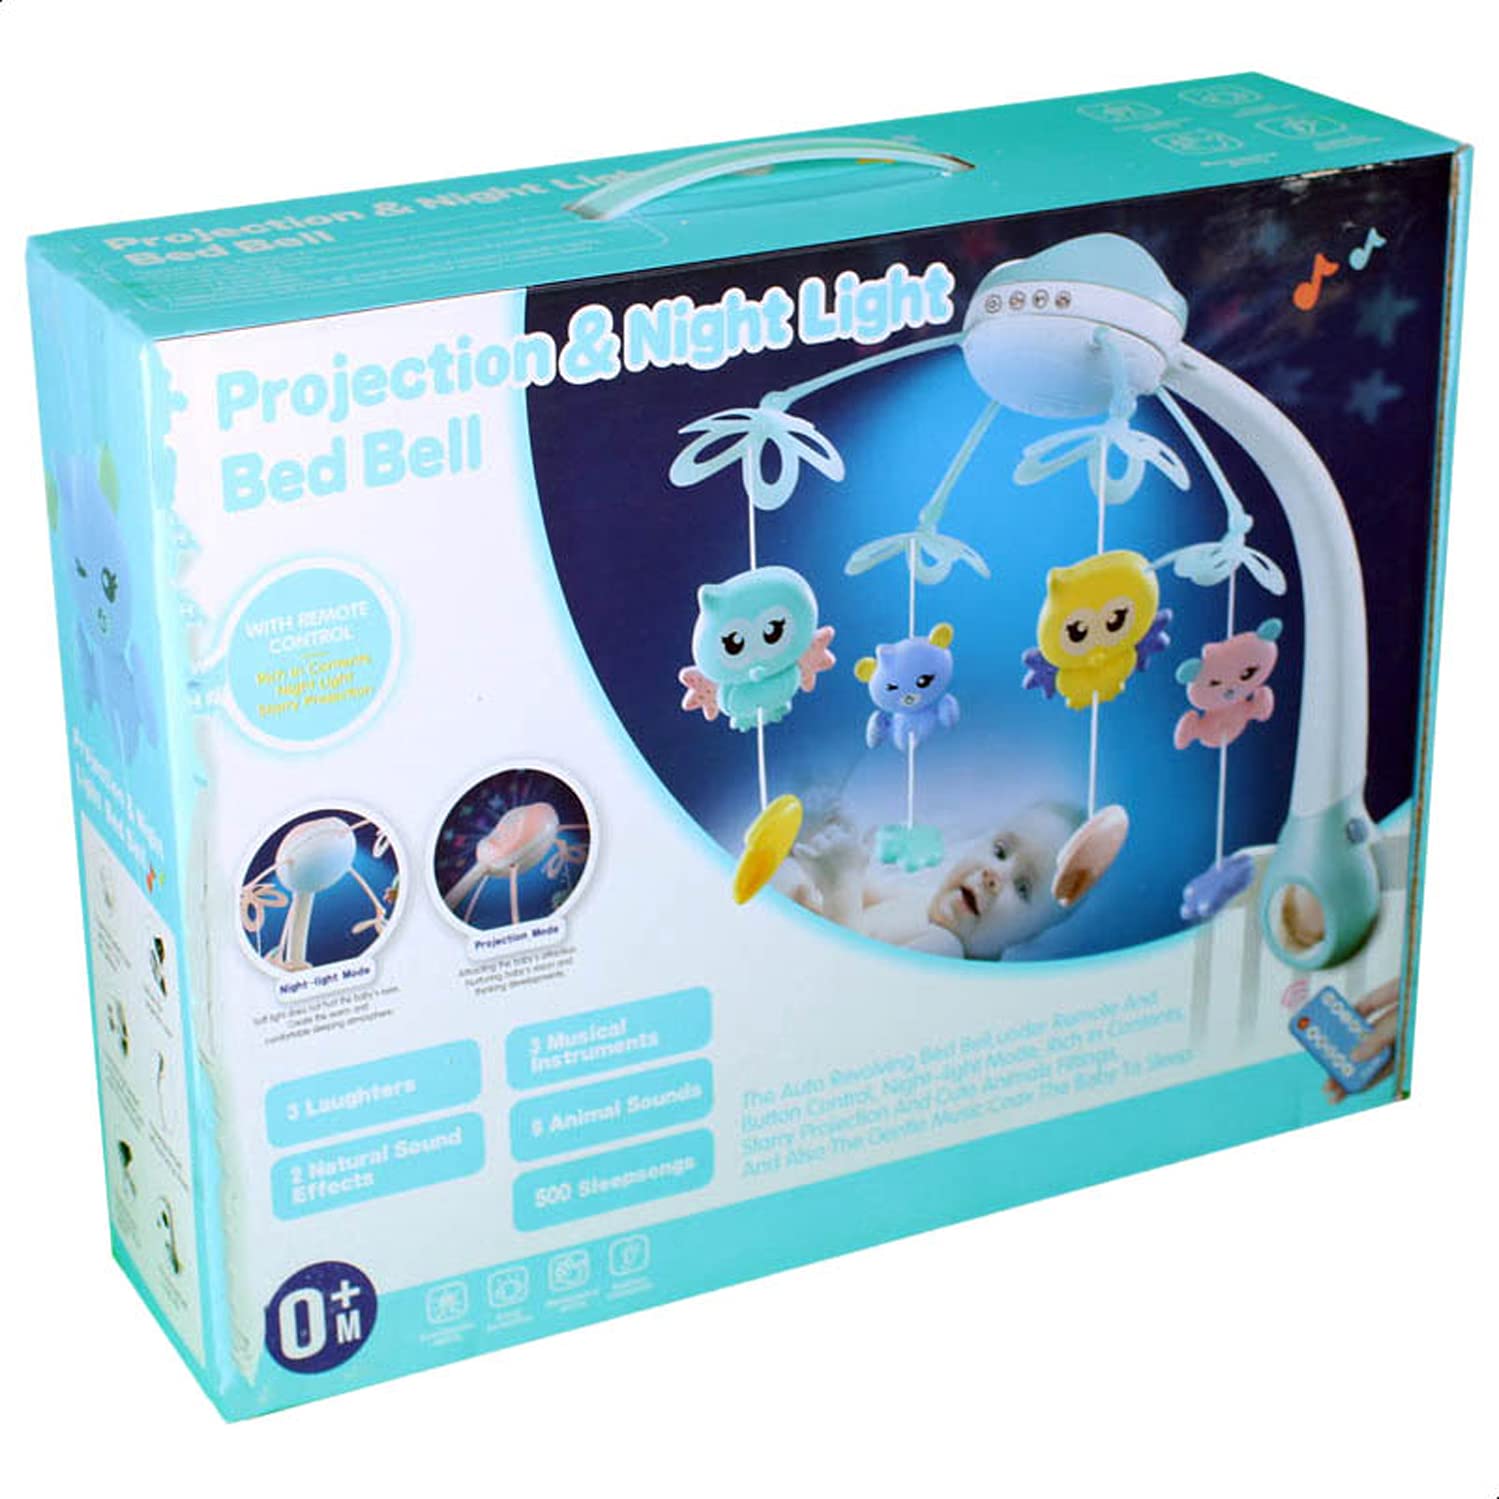 Projection & night light bed bell Baby cot mobile Baby Toys Bed Bell Musical Crib Mobile Hanging Cute Animals Rattles Newborn Early Learning Kids Toy with Light Projector with remote 0m+